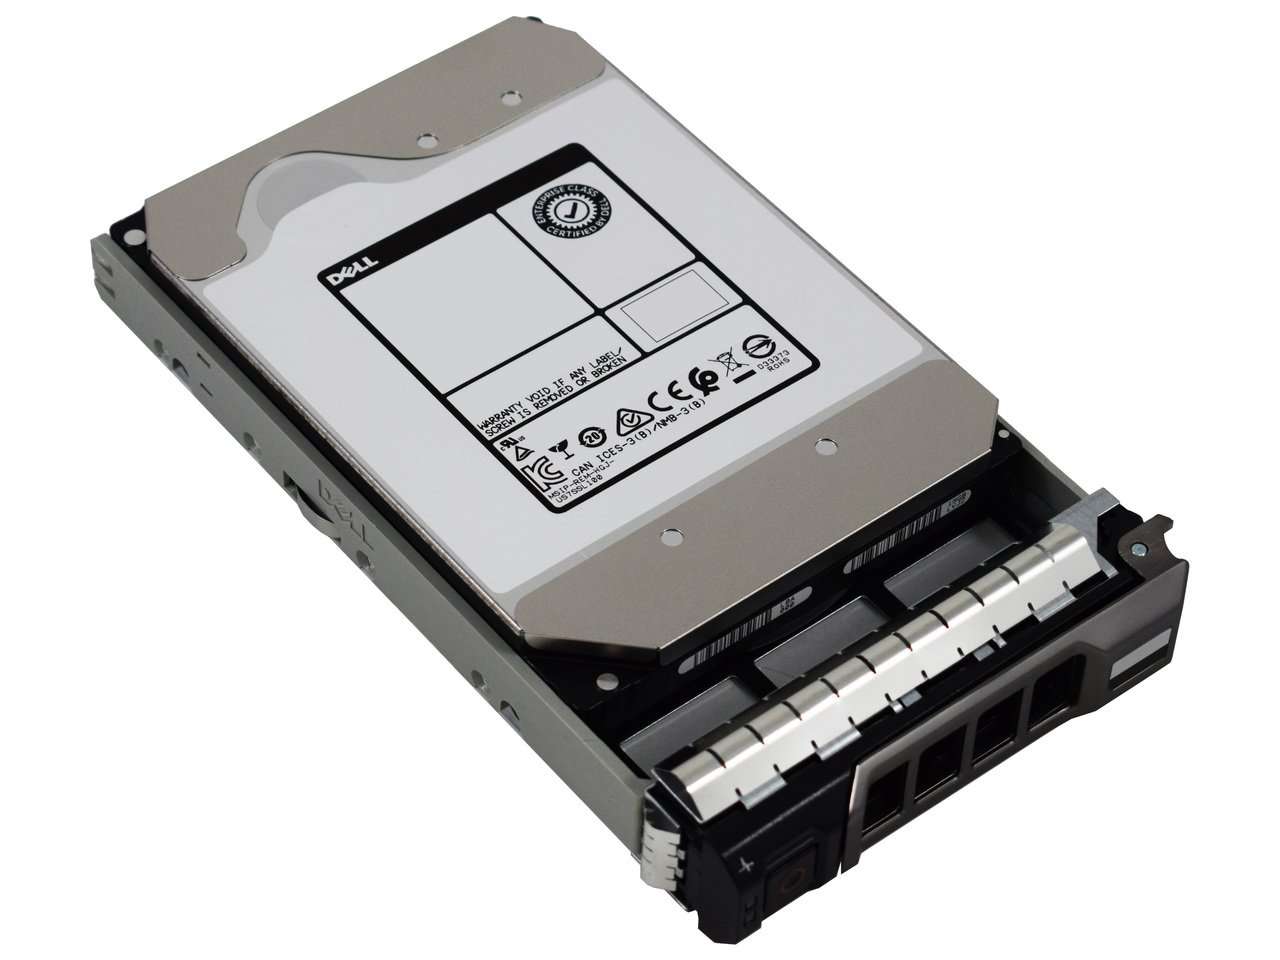 Dell G13 R755K 2TB 7.2K RPM SAS 6Gb/s 512n 128MB 3.5" NearLine Manufacturer Recertified HDD